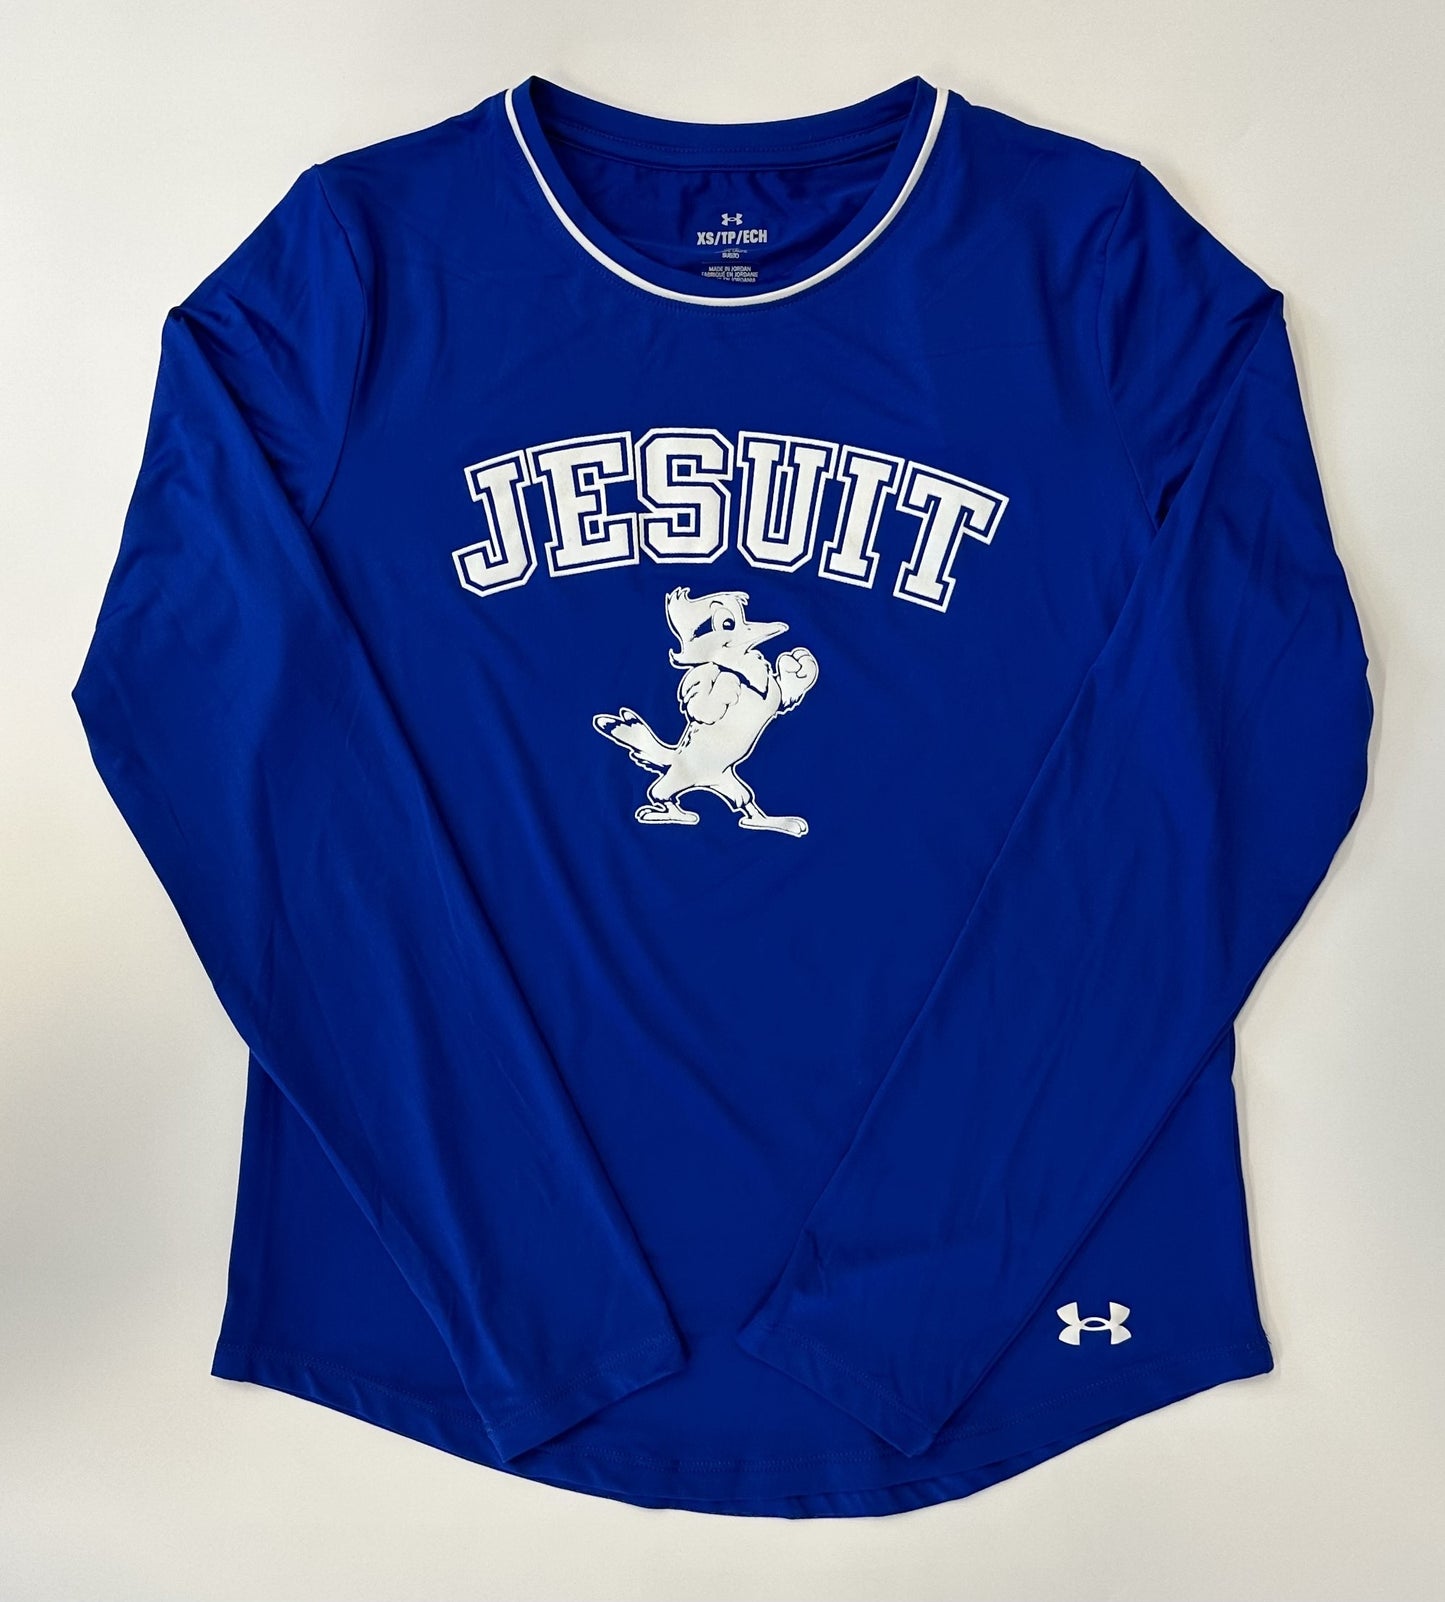 Under Armour.  90% Polyester/10% Elastane.  UA Tech fabric is quick-drying, ultra-soft & has a more natural feel. Set in sleeve construction with 1/8" white pipe detail at neckline. Curved hemline.  JESUIT w/Jayson logo.